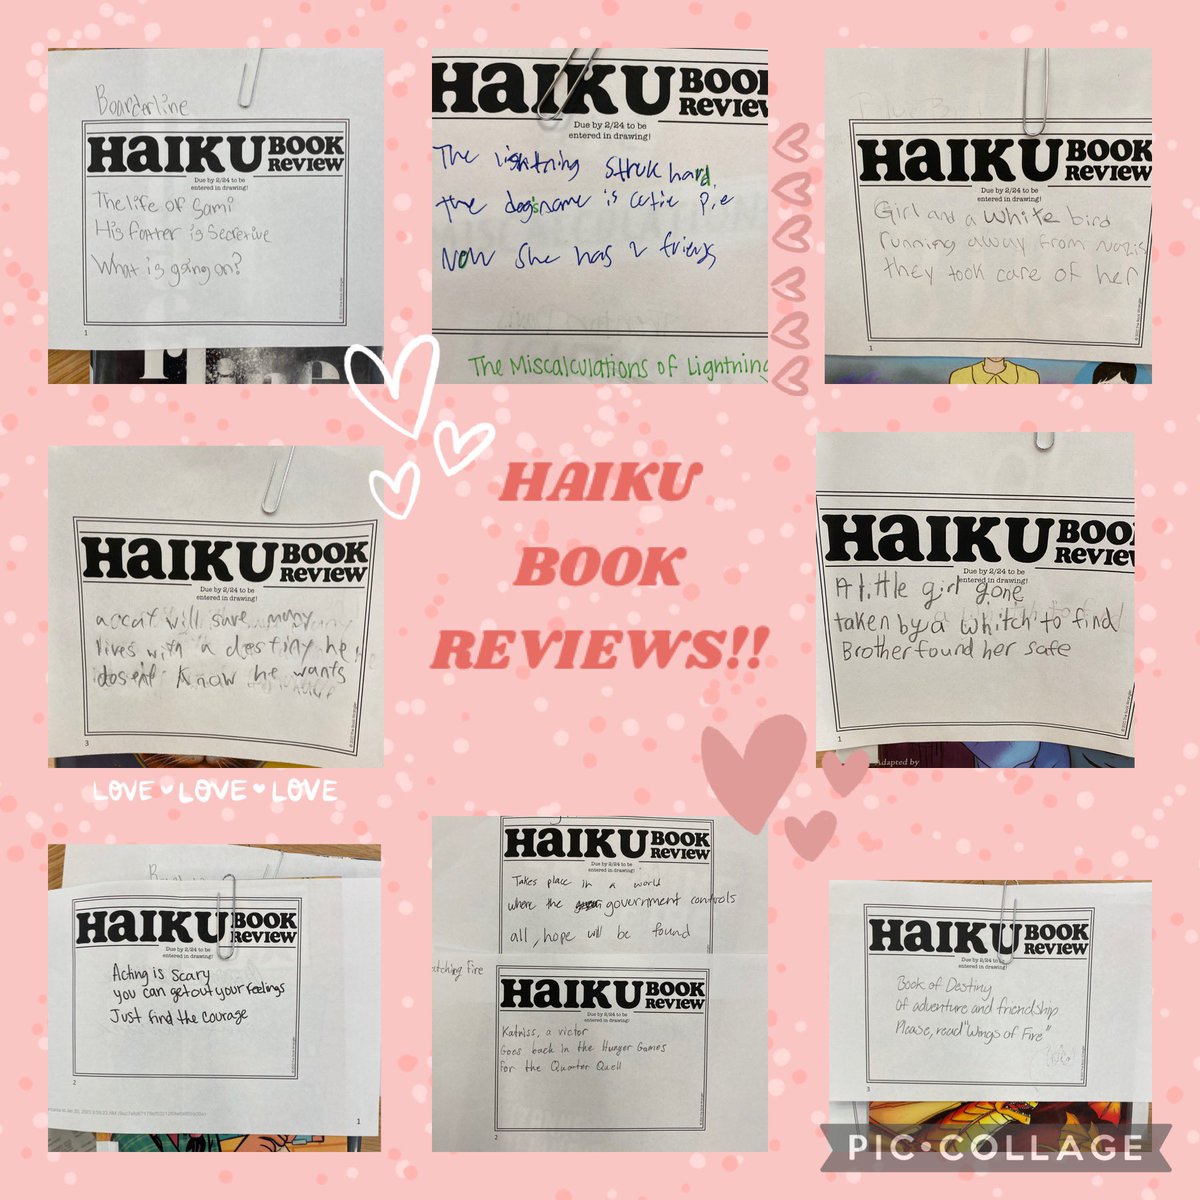 Leopards, look at these
Awesome Haiku Book Reviews!
You can write one too! 
🖤💛📚 #LVMSReads #TheLakeviewWay #LISDLib